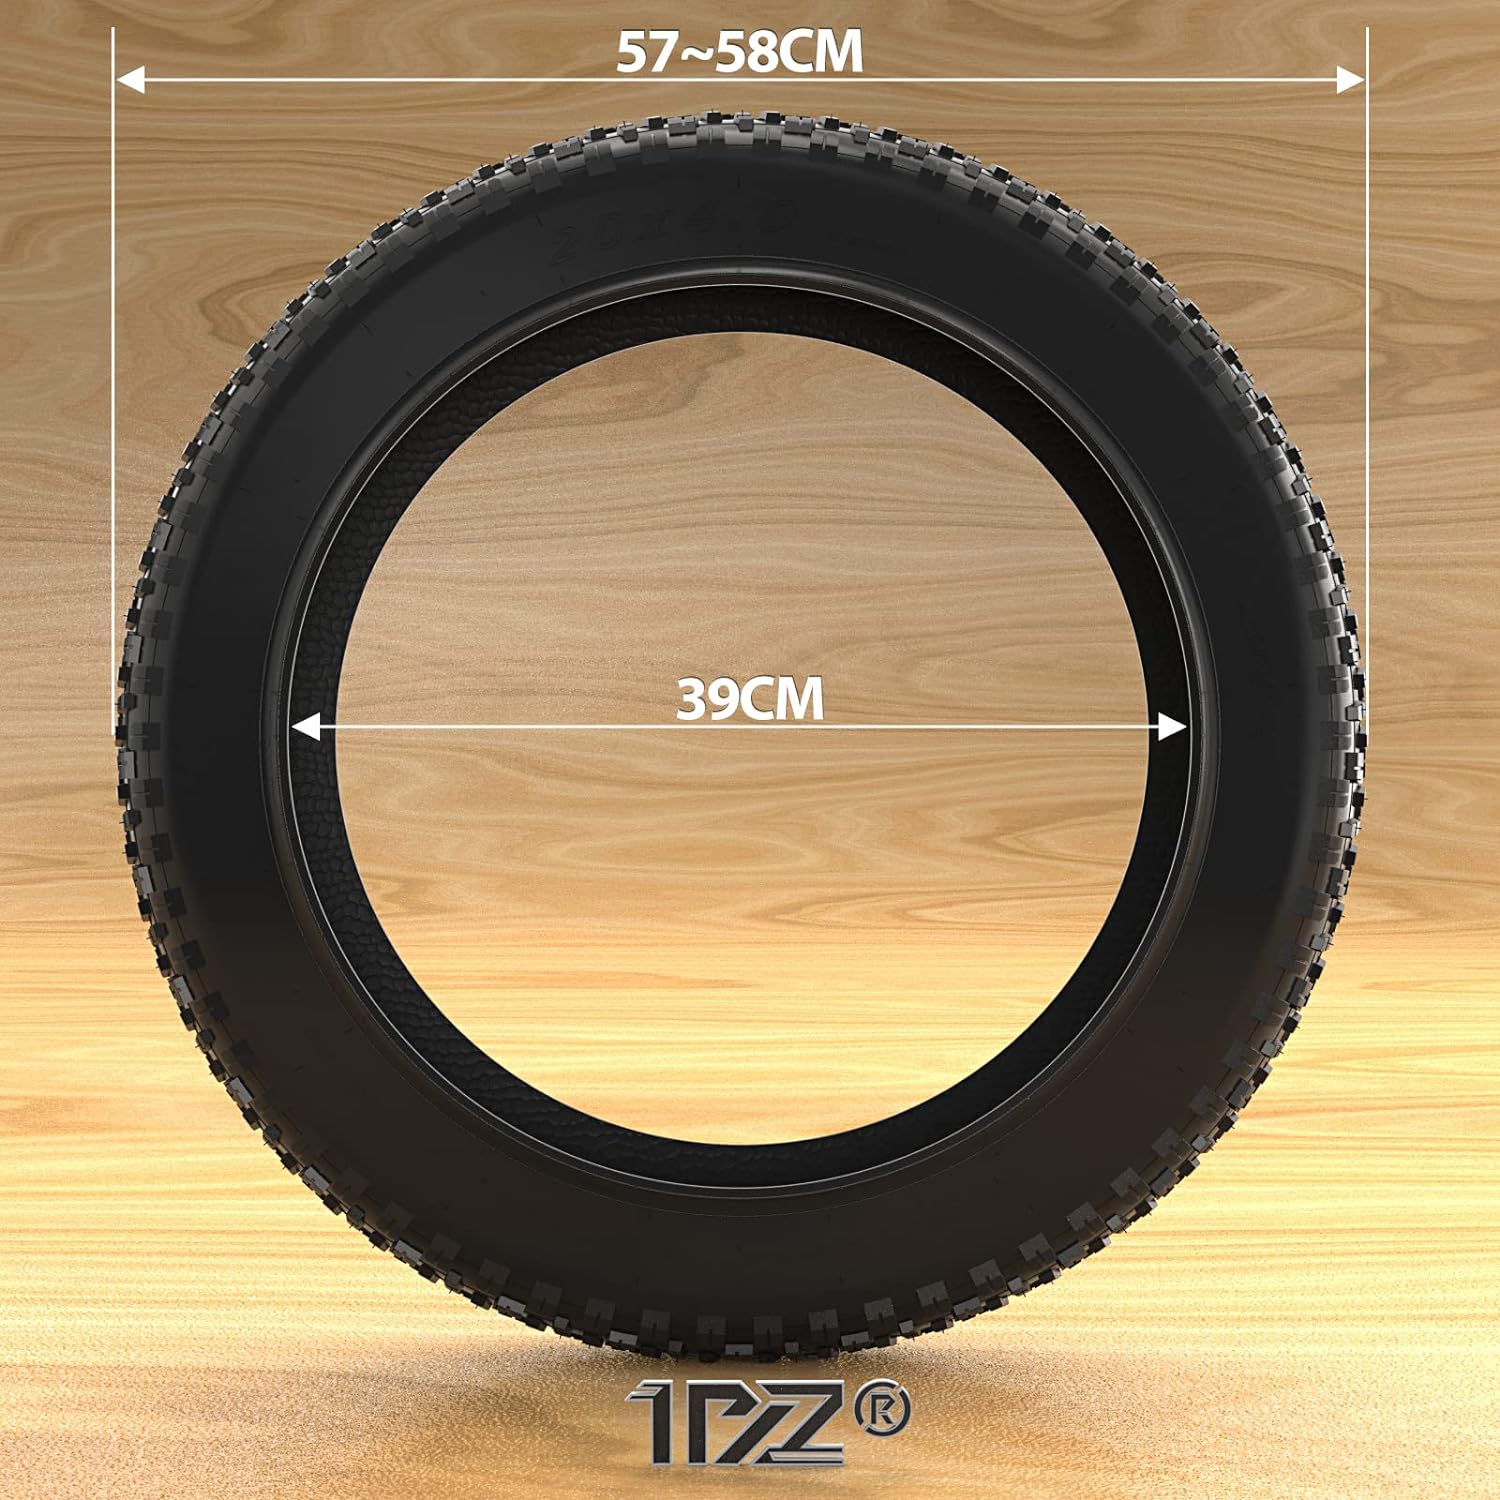 1PZ 20 x 4.0 Fat Tire, Folding Mountain Bike Tires, Replacement MTB Tires for On or Off Road Use